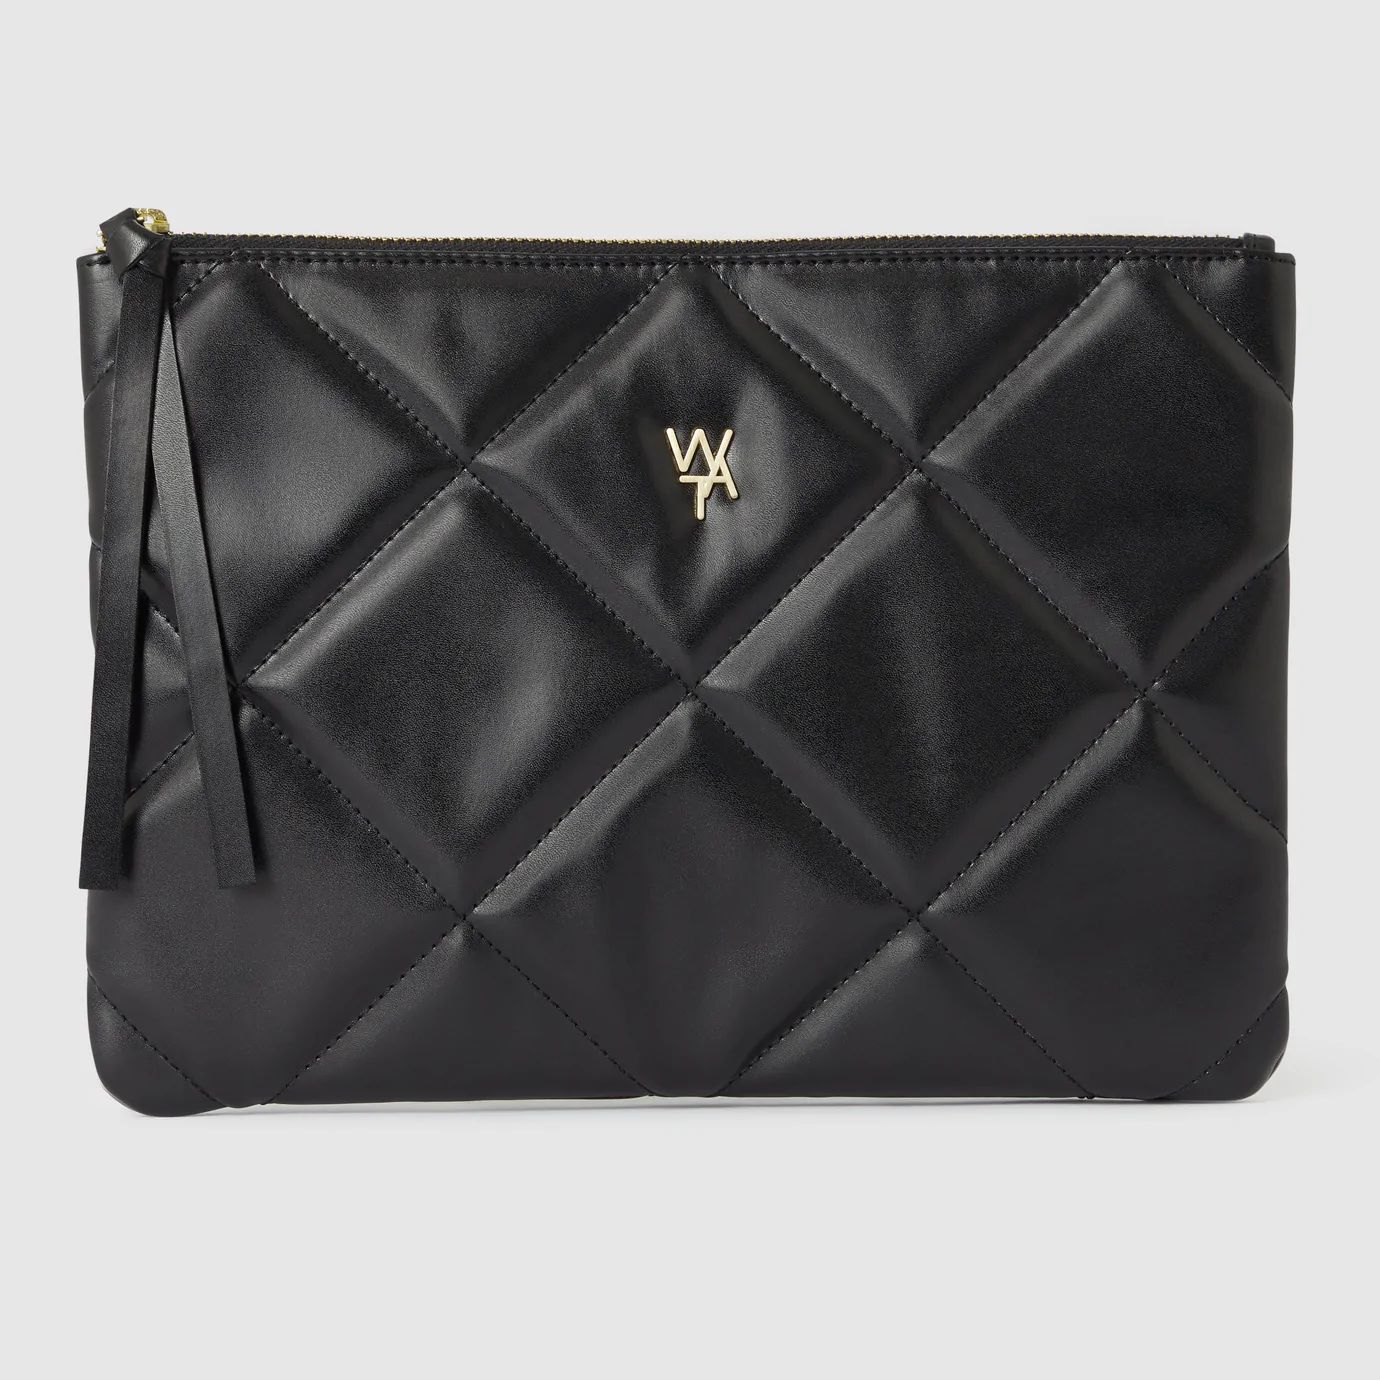 VEGAN LEATHER QUILTED POUCH - BLACK | WAT The Brand